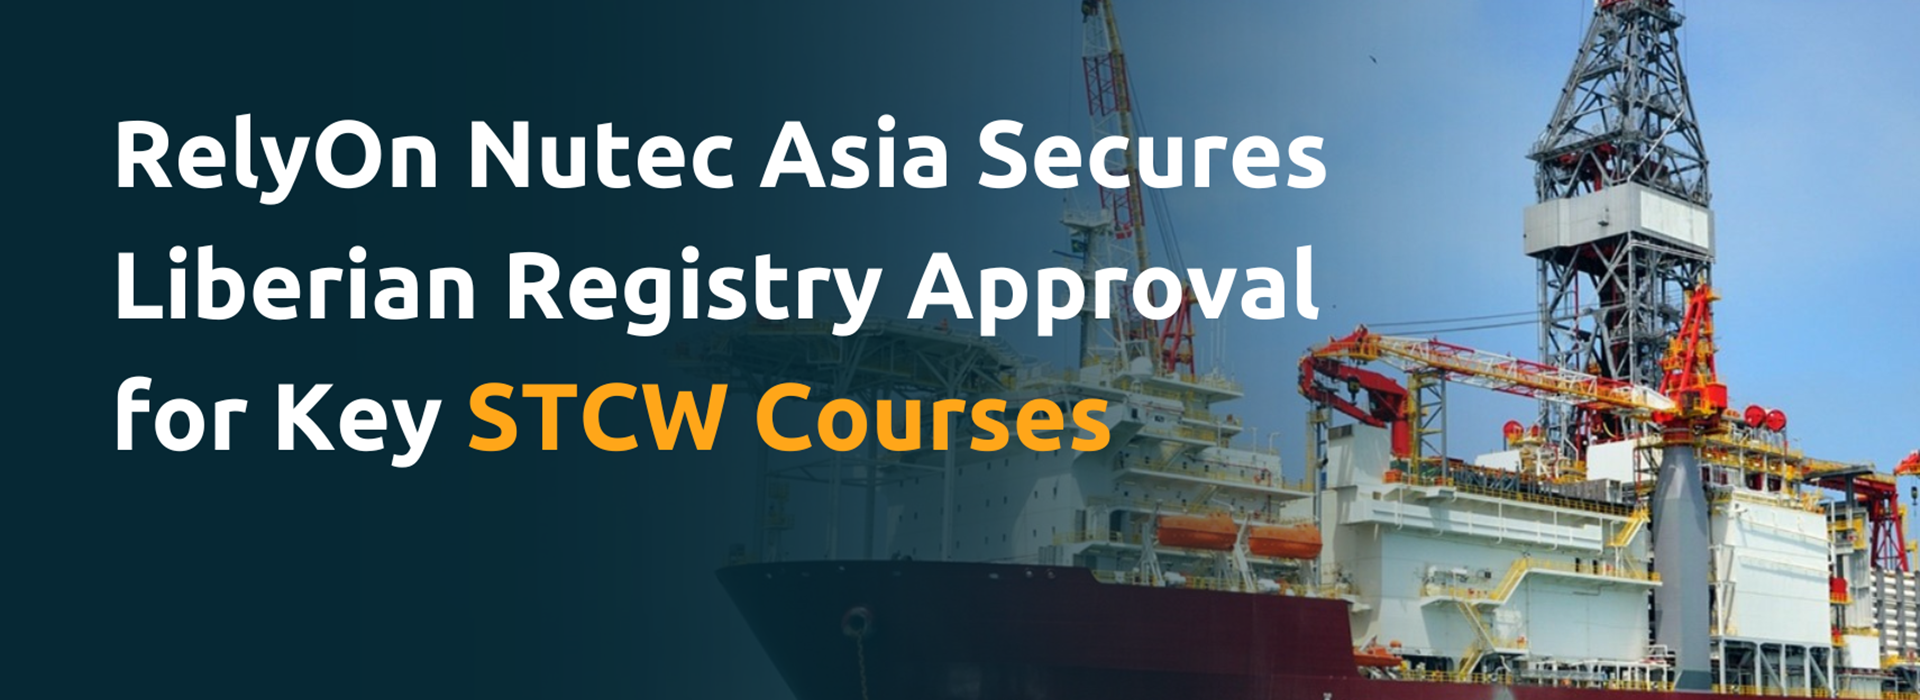 Relyon Nutec Asia Secures Liberian Registry Approval For Key STCW Course Article Thumbnail